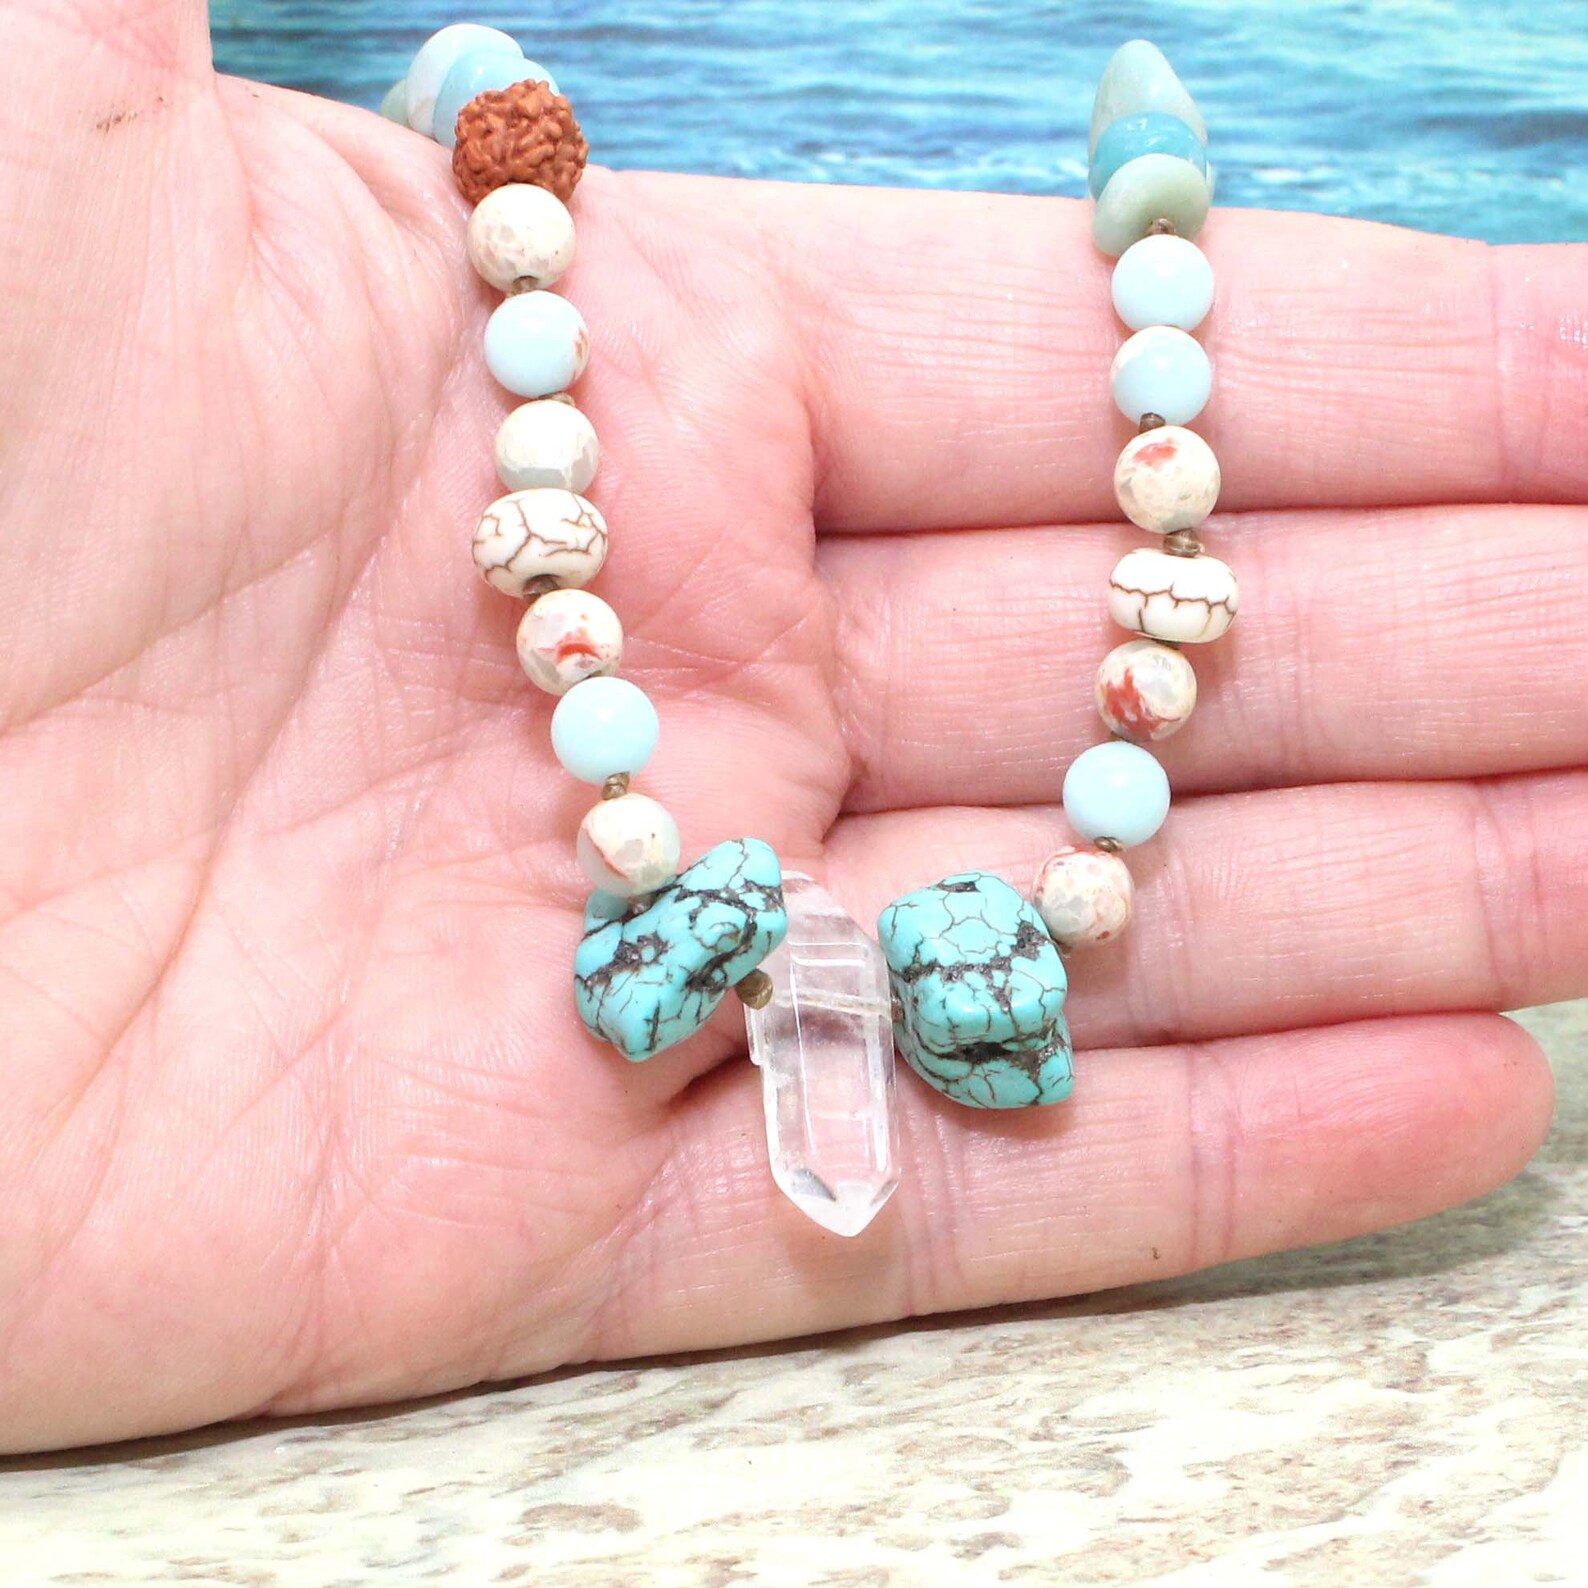 BABY MALA / Toddler Necklace / Healing Crystals for Children / | Etsy